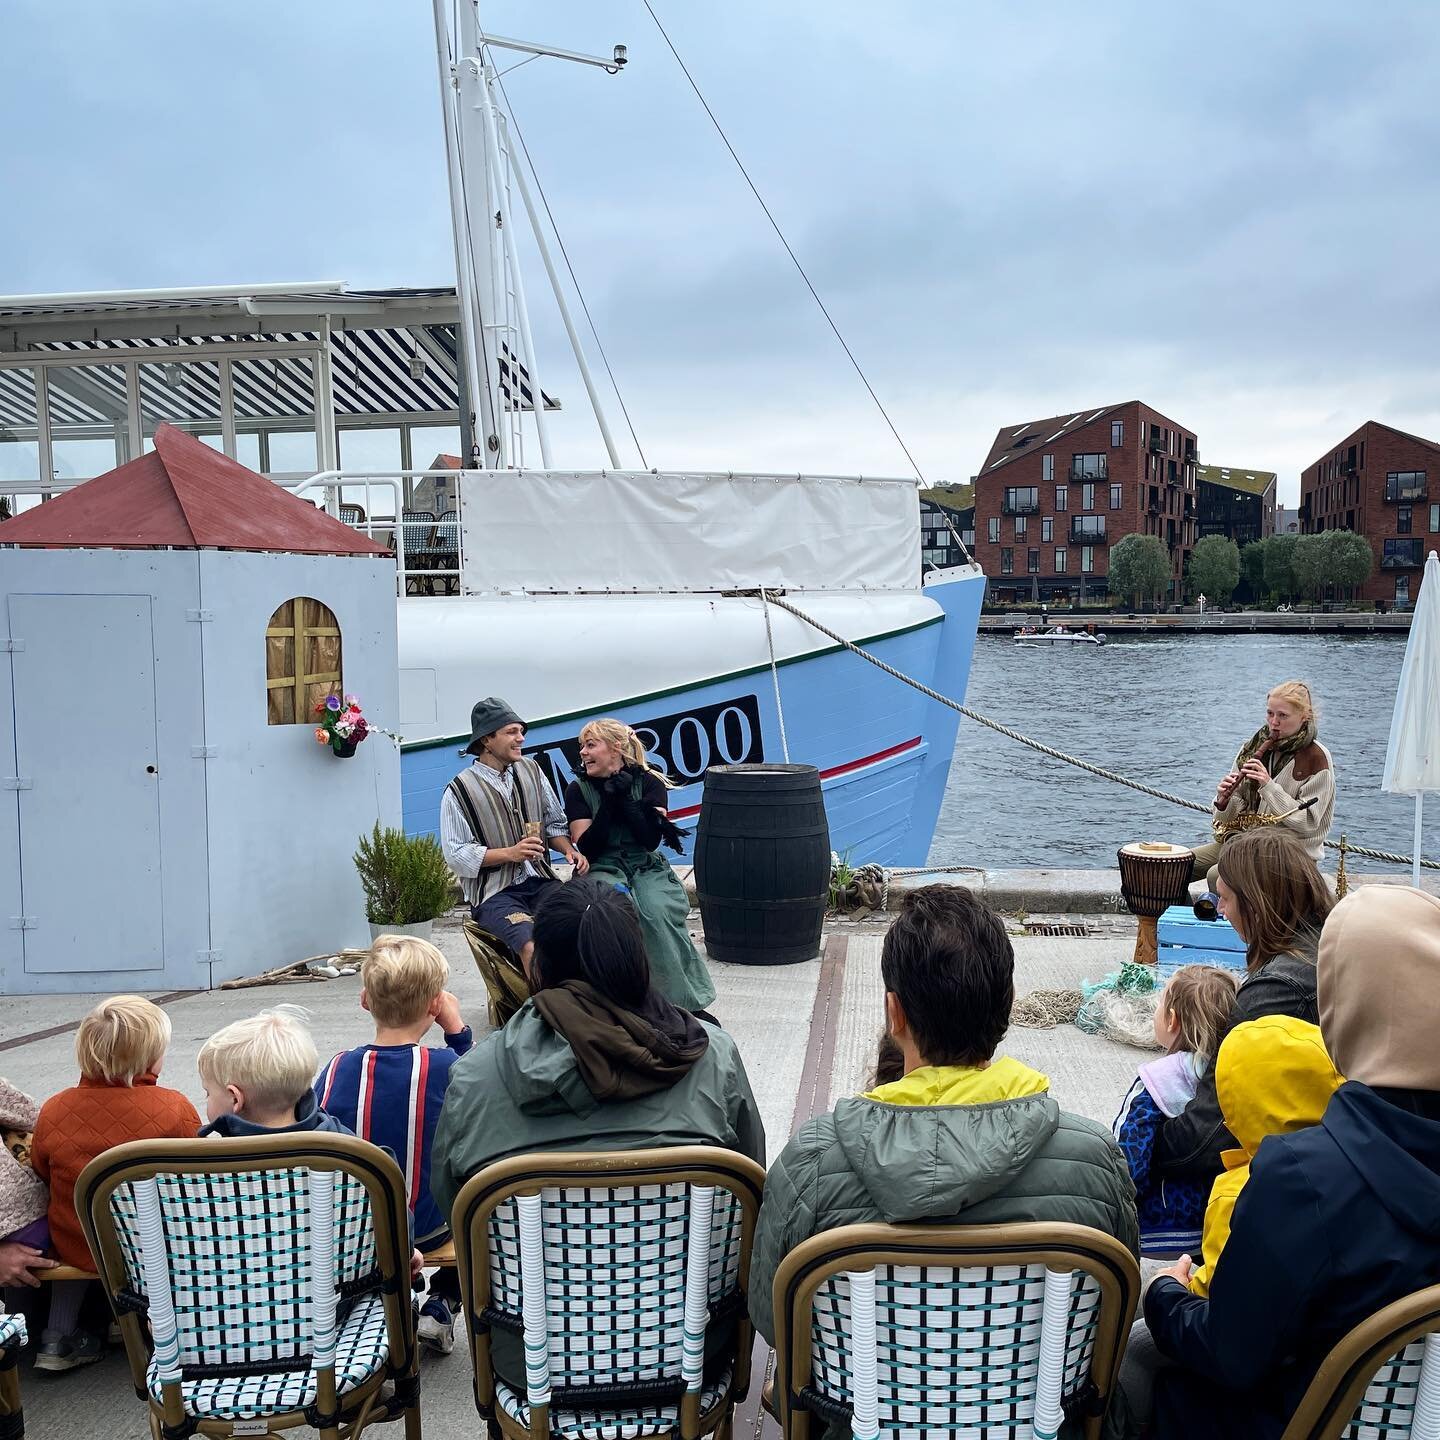 Can&rsquo;t help but be in awe of the passion of a small theatre group performing for a handful of people on a gray Sunday morning in the Copenhagen harbor. 

Happy ☀️day and here&rsquo;s to all the passionate artists who can turn a gray sky blue.